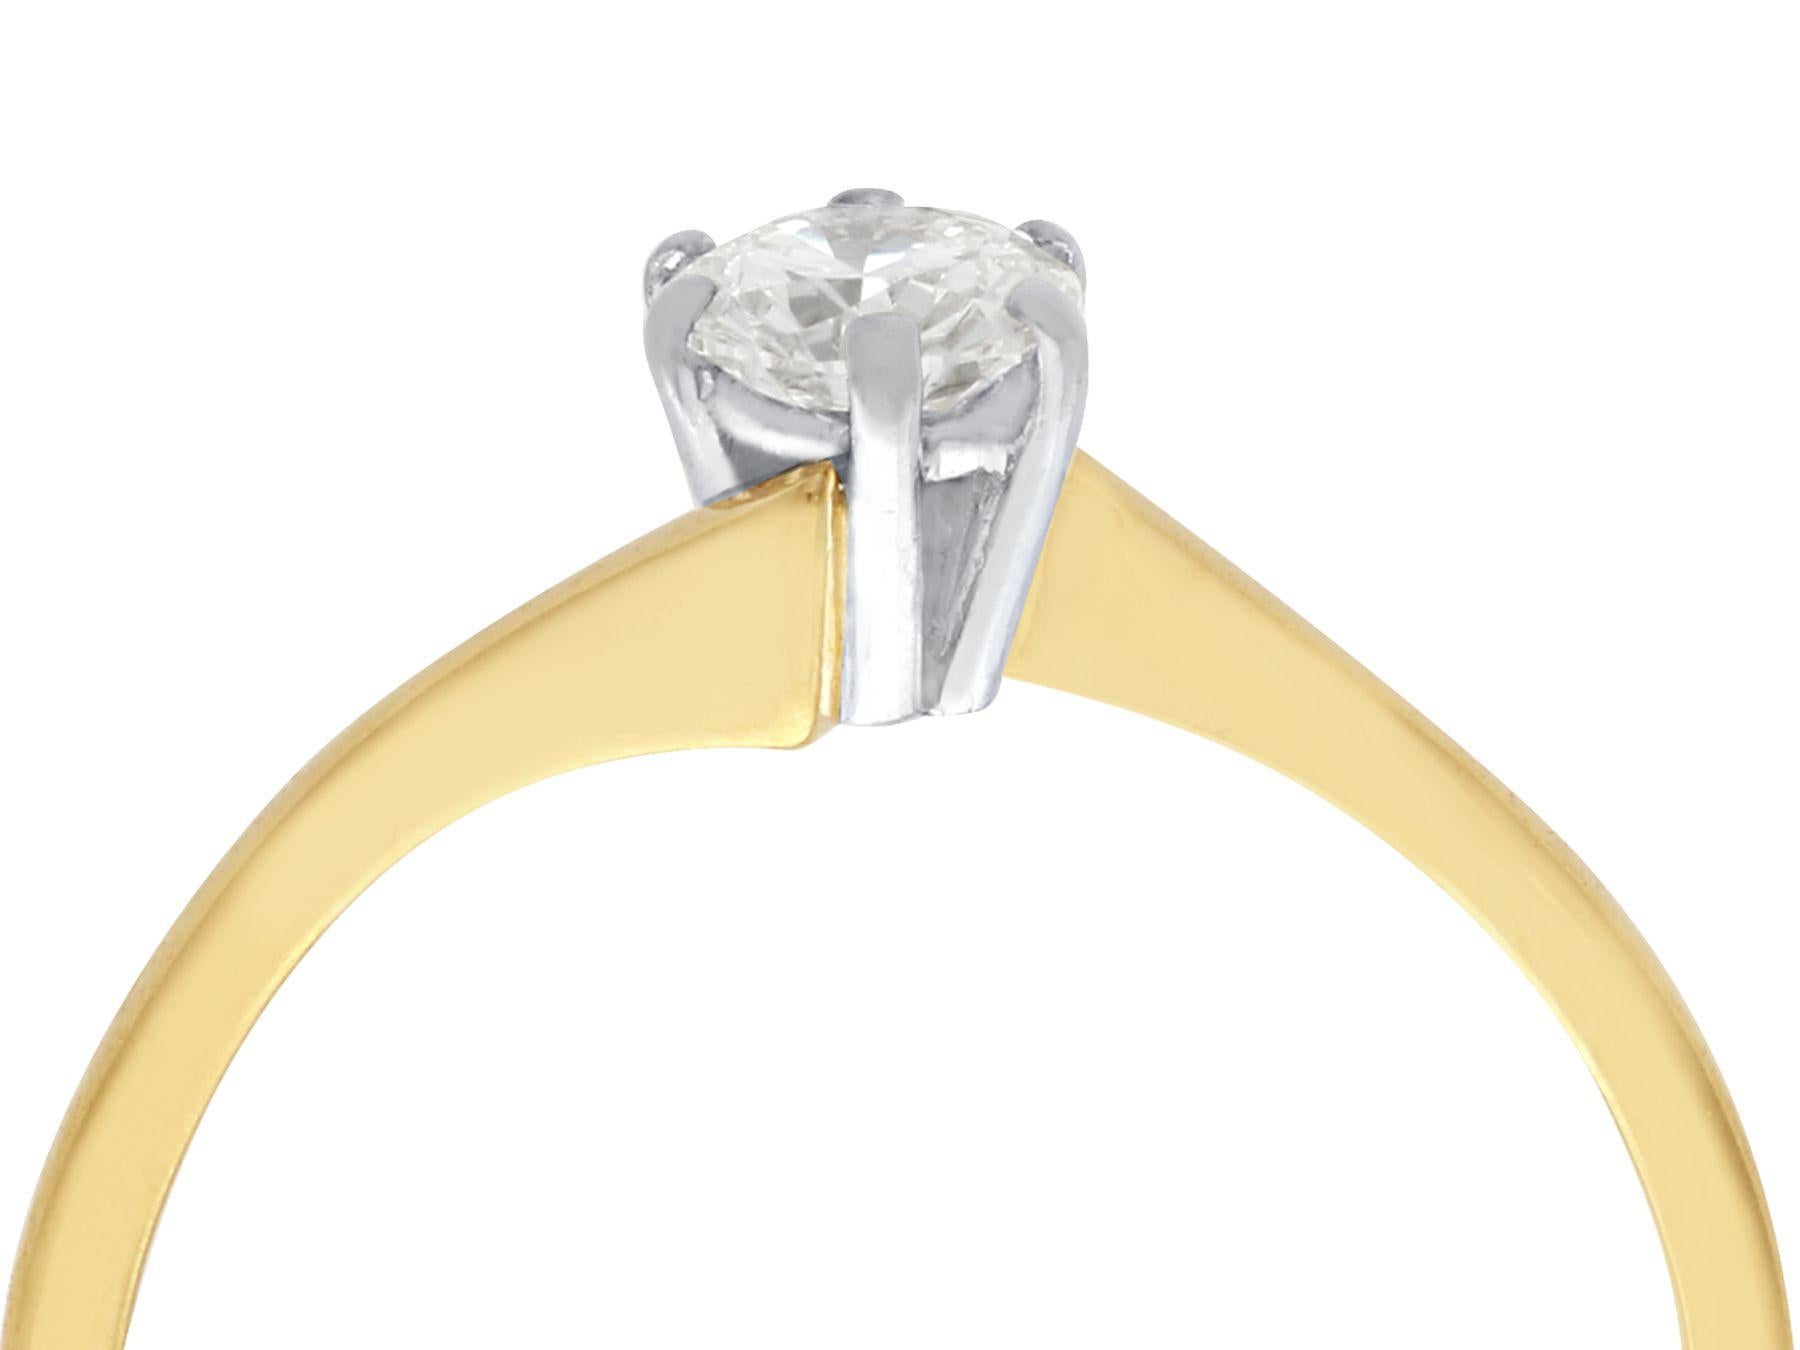 A fine and impressive 0.37 carat diamond and 18 karat yellow gold solitaire twist ring; part of our contemporary jewelry and estate jewelry collections.

This fine and impressive contemporary diamond solitaire twist ring has been crafted in 18k